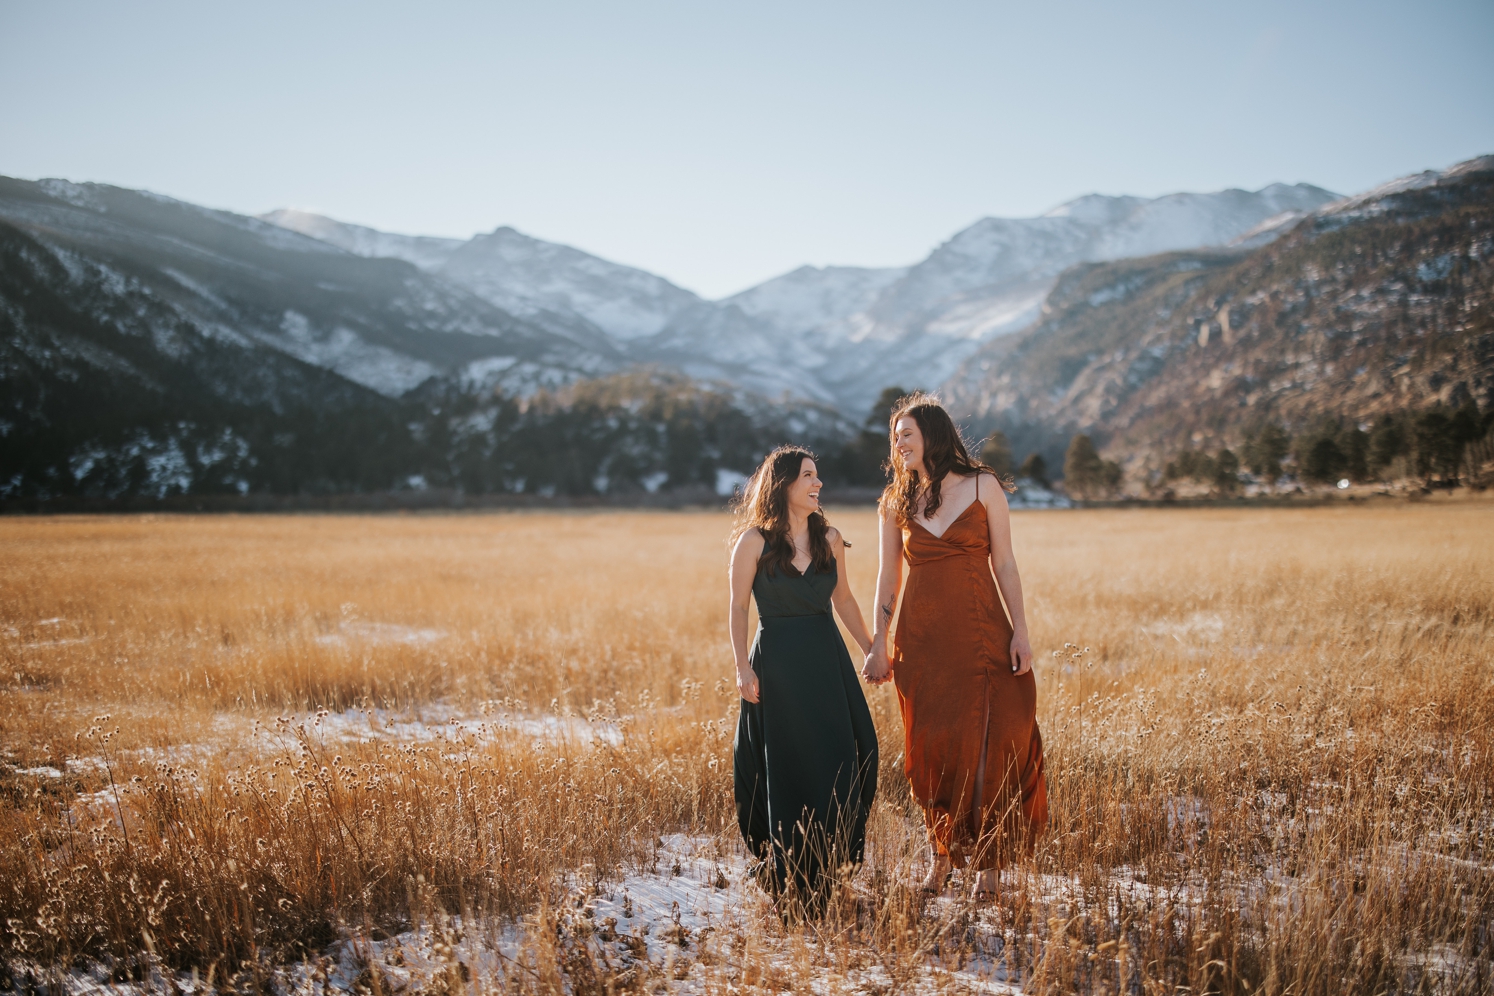 Newly engaged couple holding hands and walking through field with mountains in the background | McArthur Weddings and Events